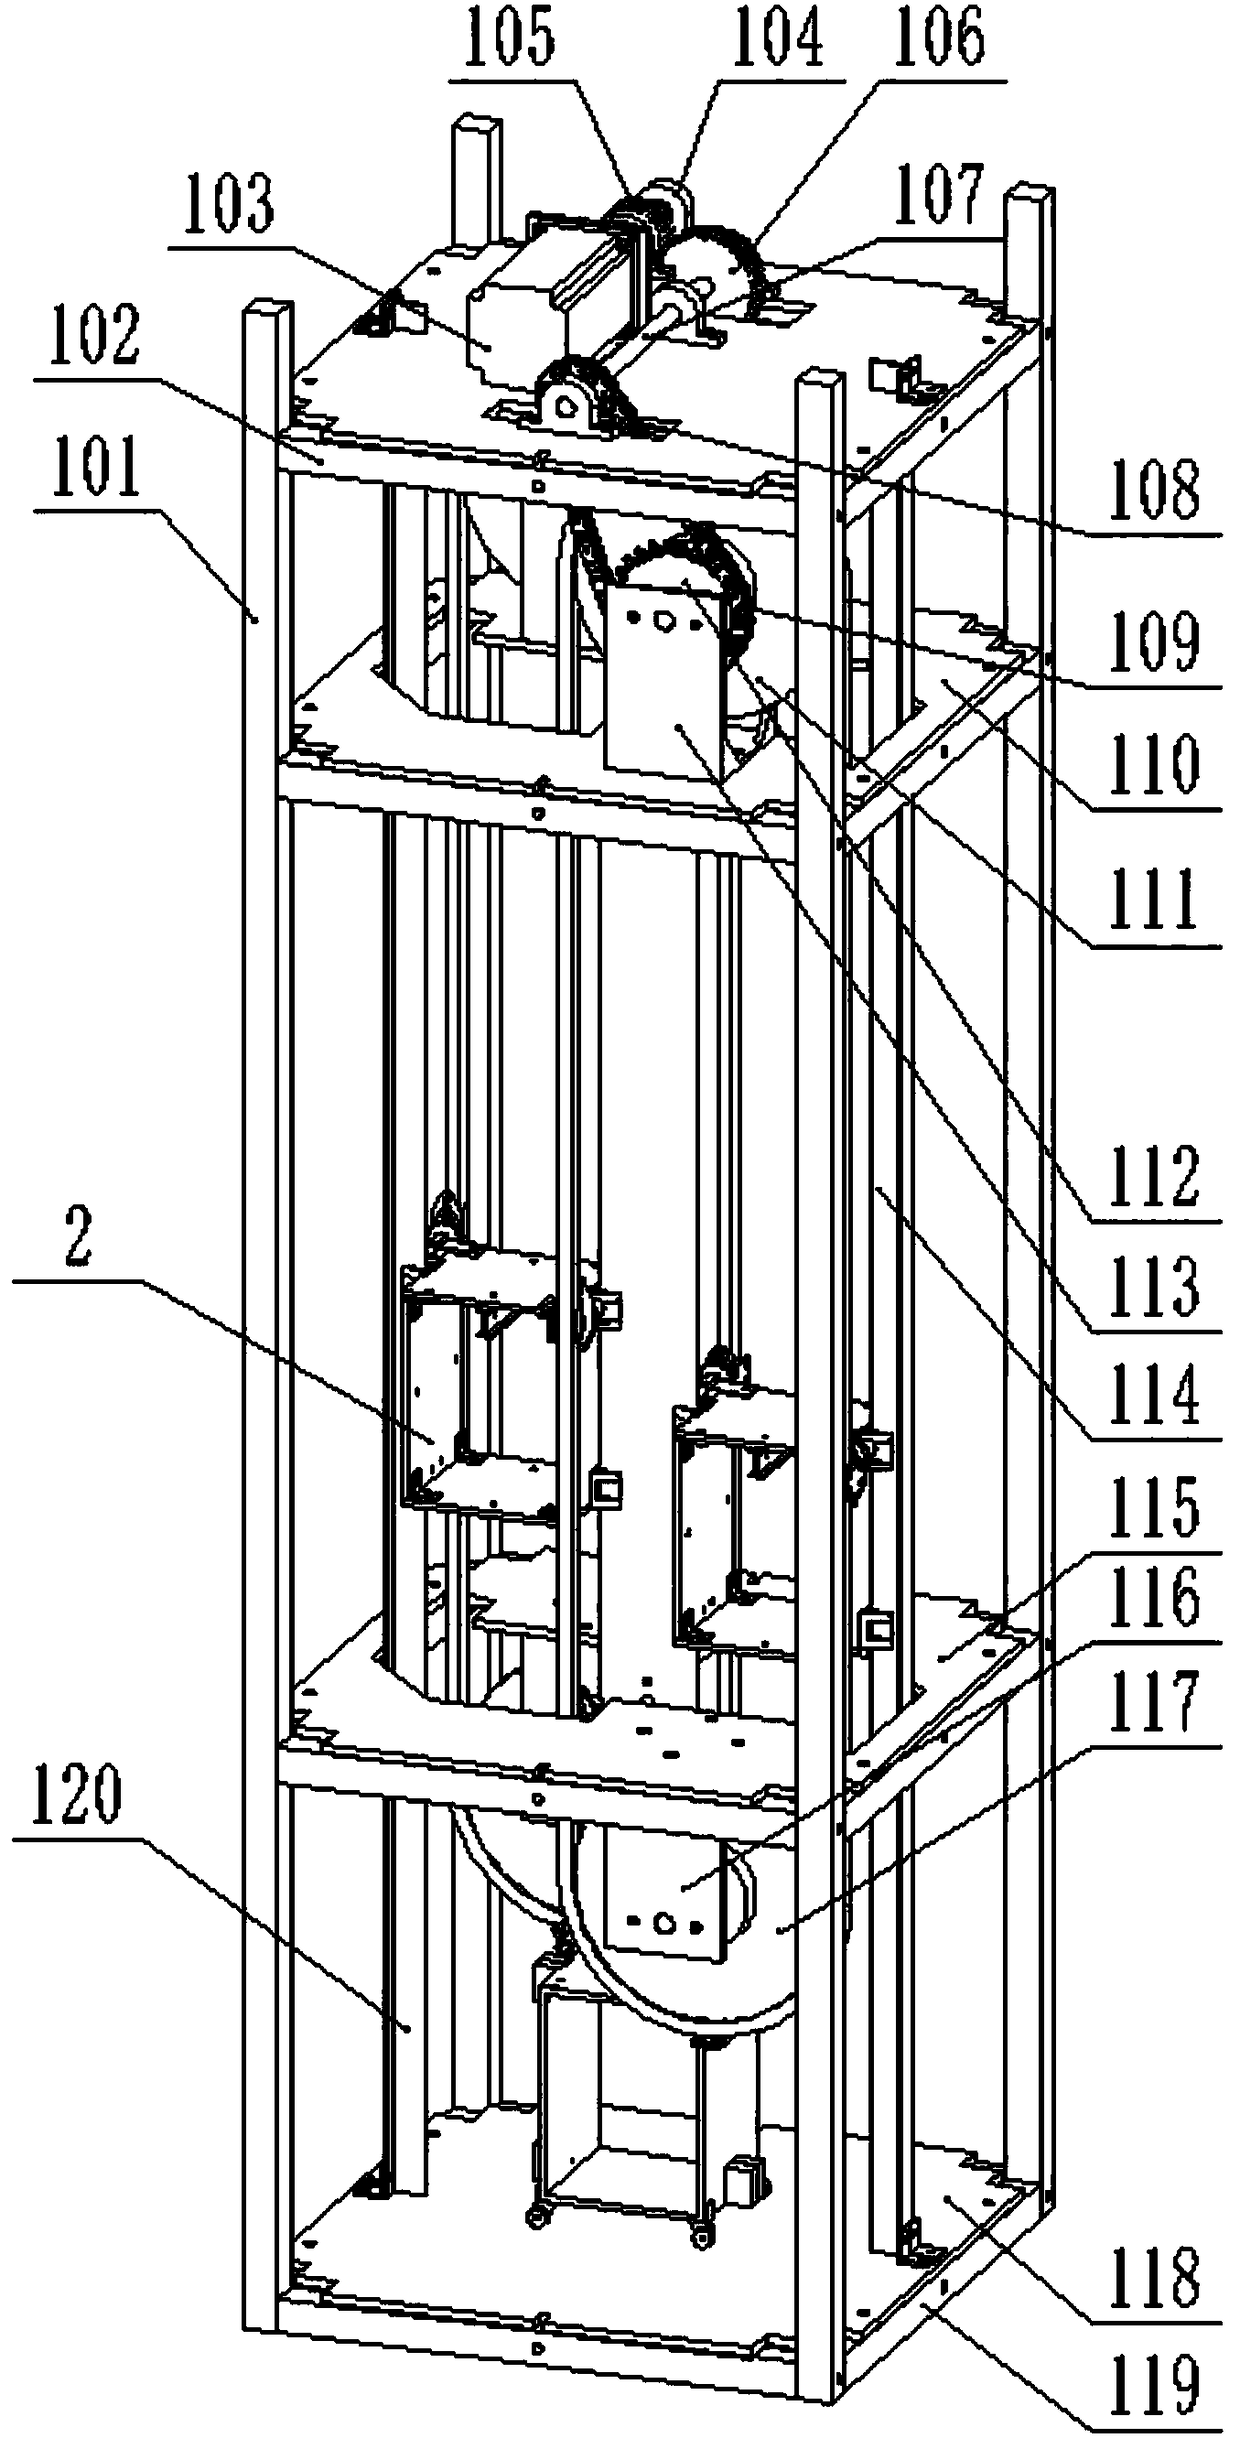 Elevator capable of realizing vertical and horizontal cycle operation